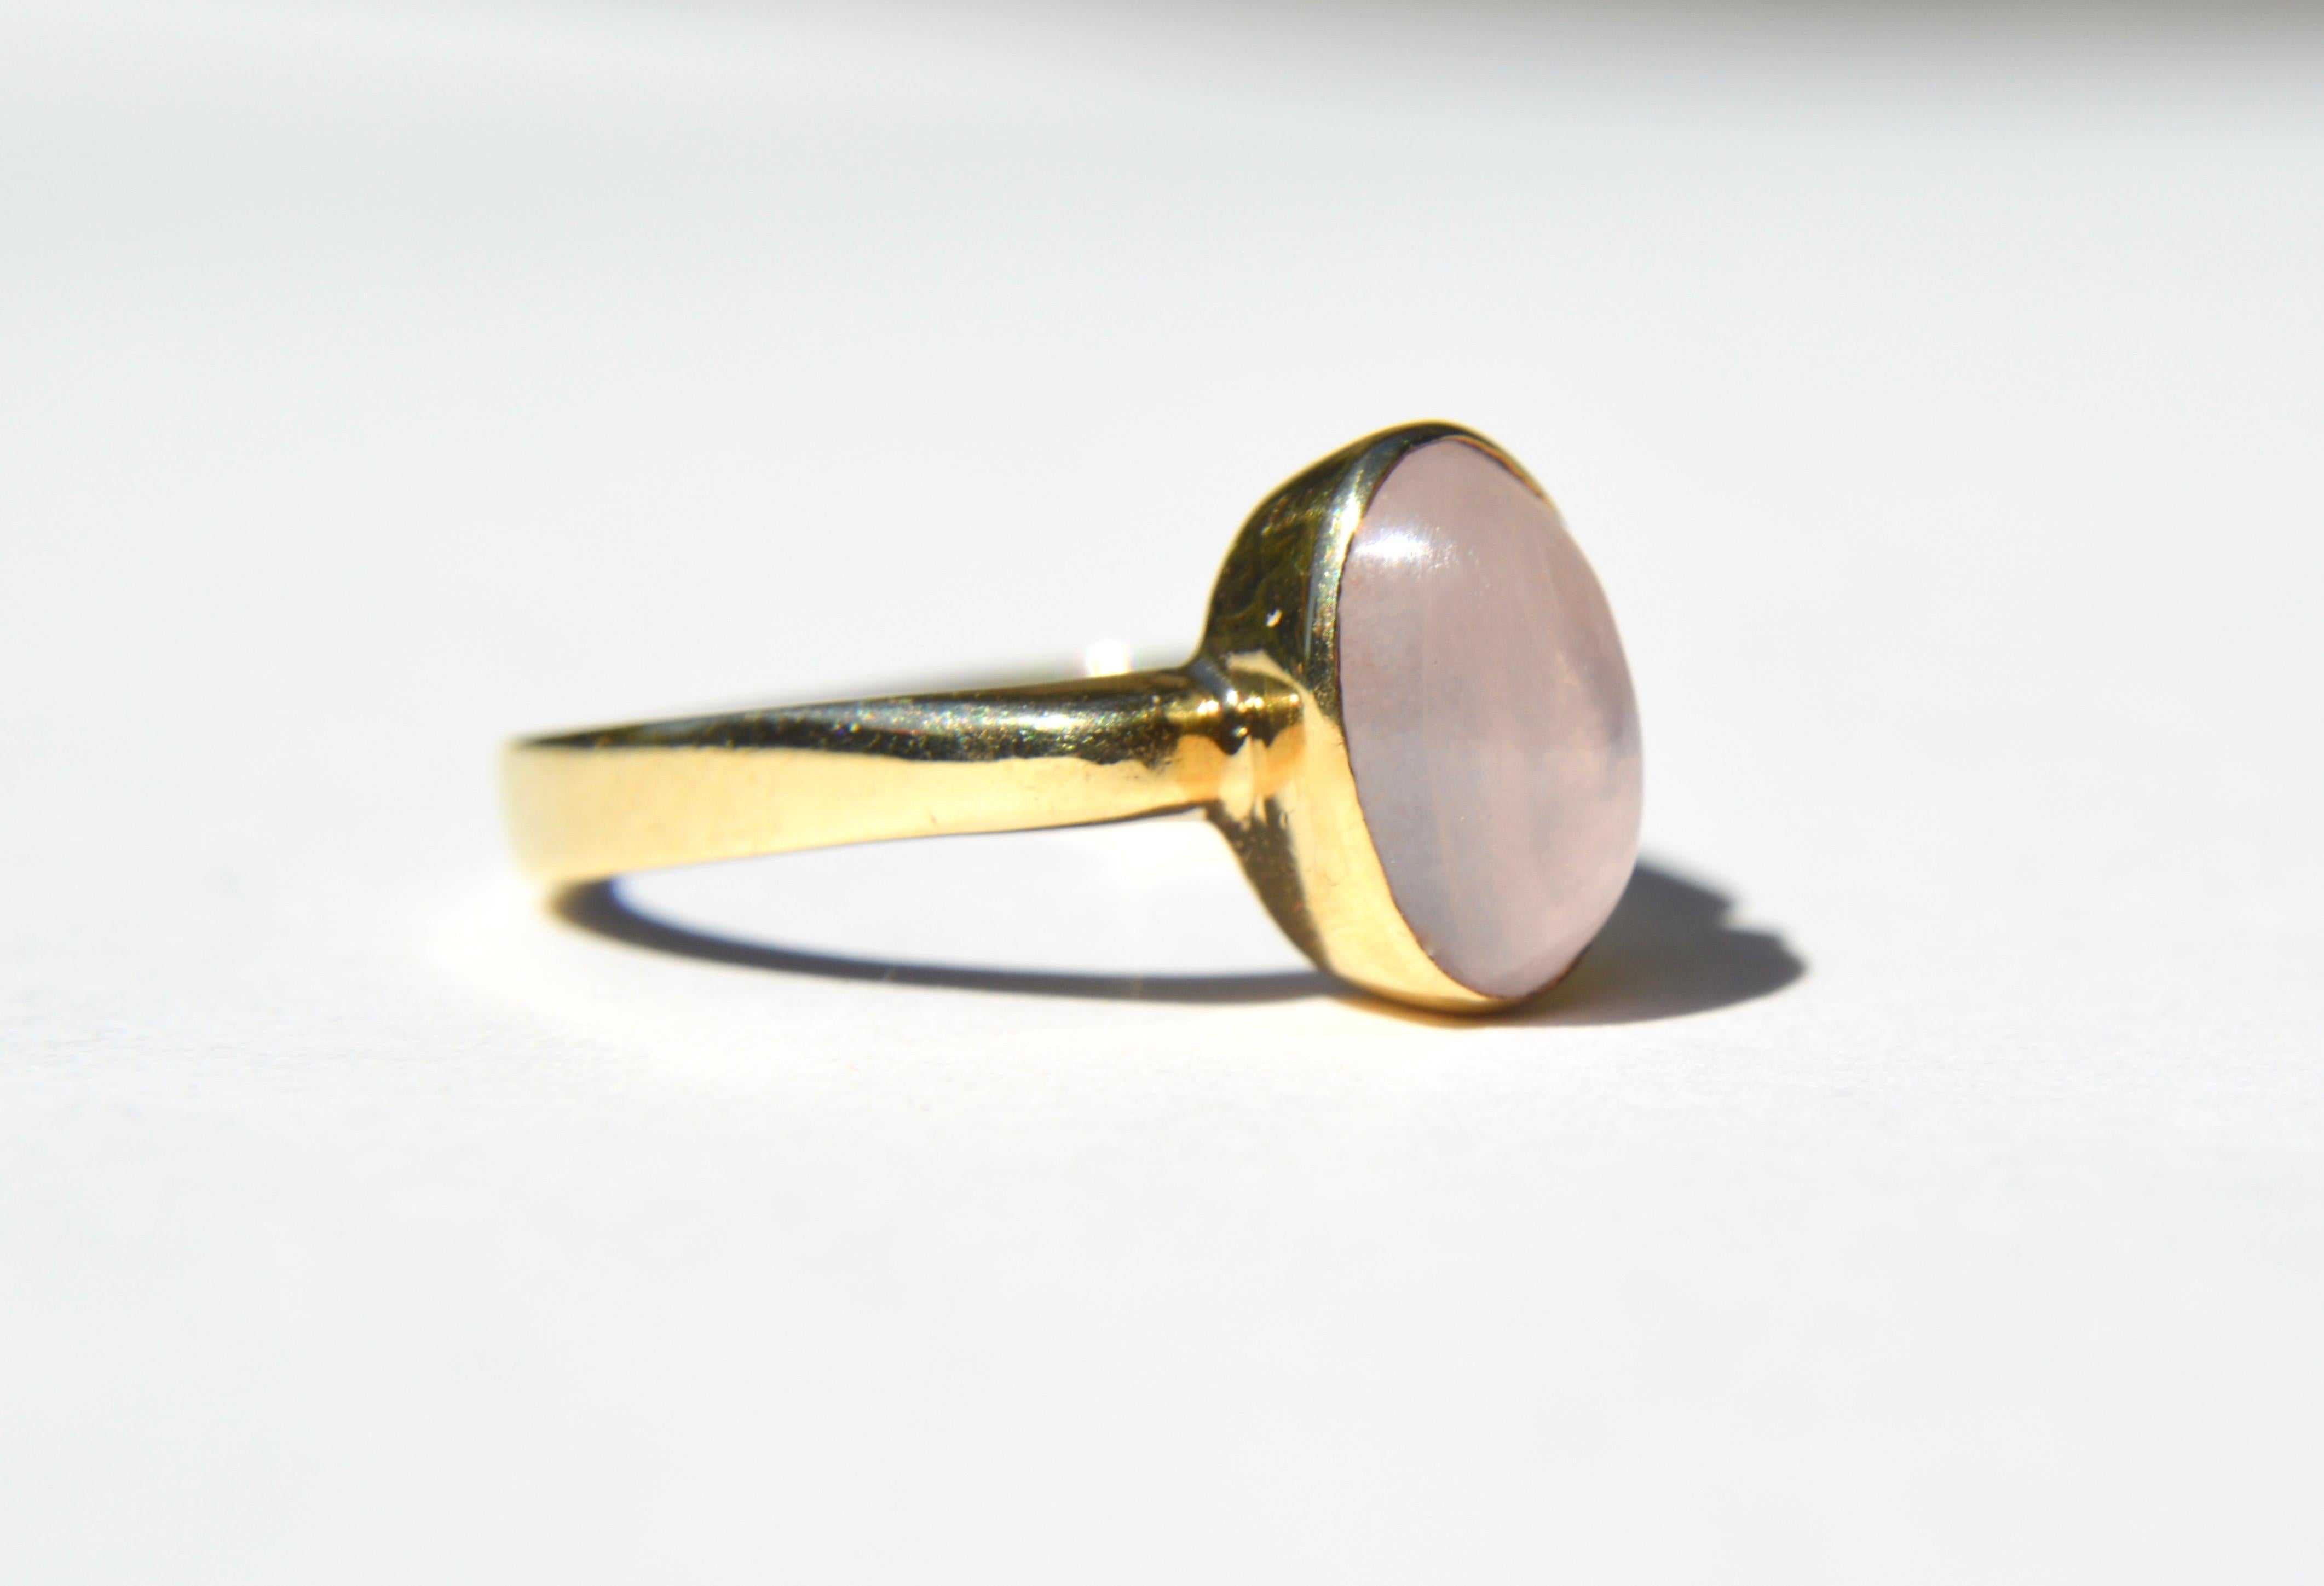 Gorgeous vintage 1960s moonstone cabochon bezel set ring in solid 8K gold. Size 6.25, resizable by a jeweler. In very good condition. Moonstone measures 10 x 7mm. Marked and tested as 535 (8K).